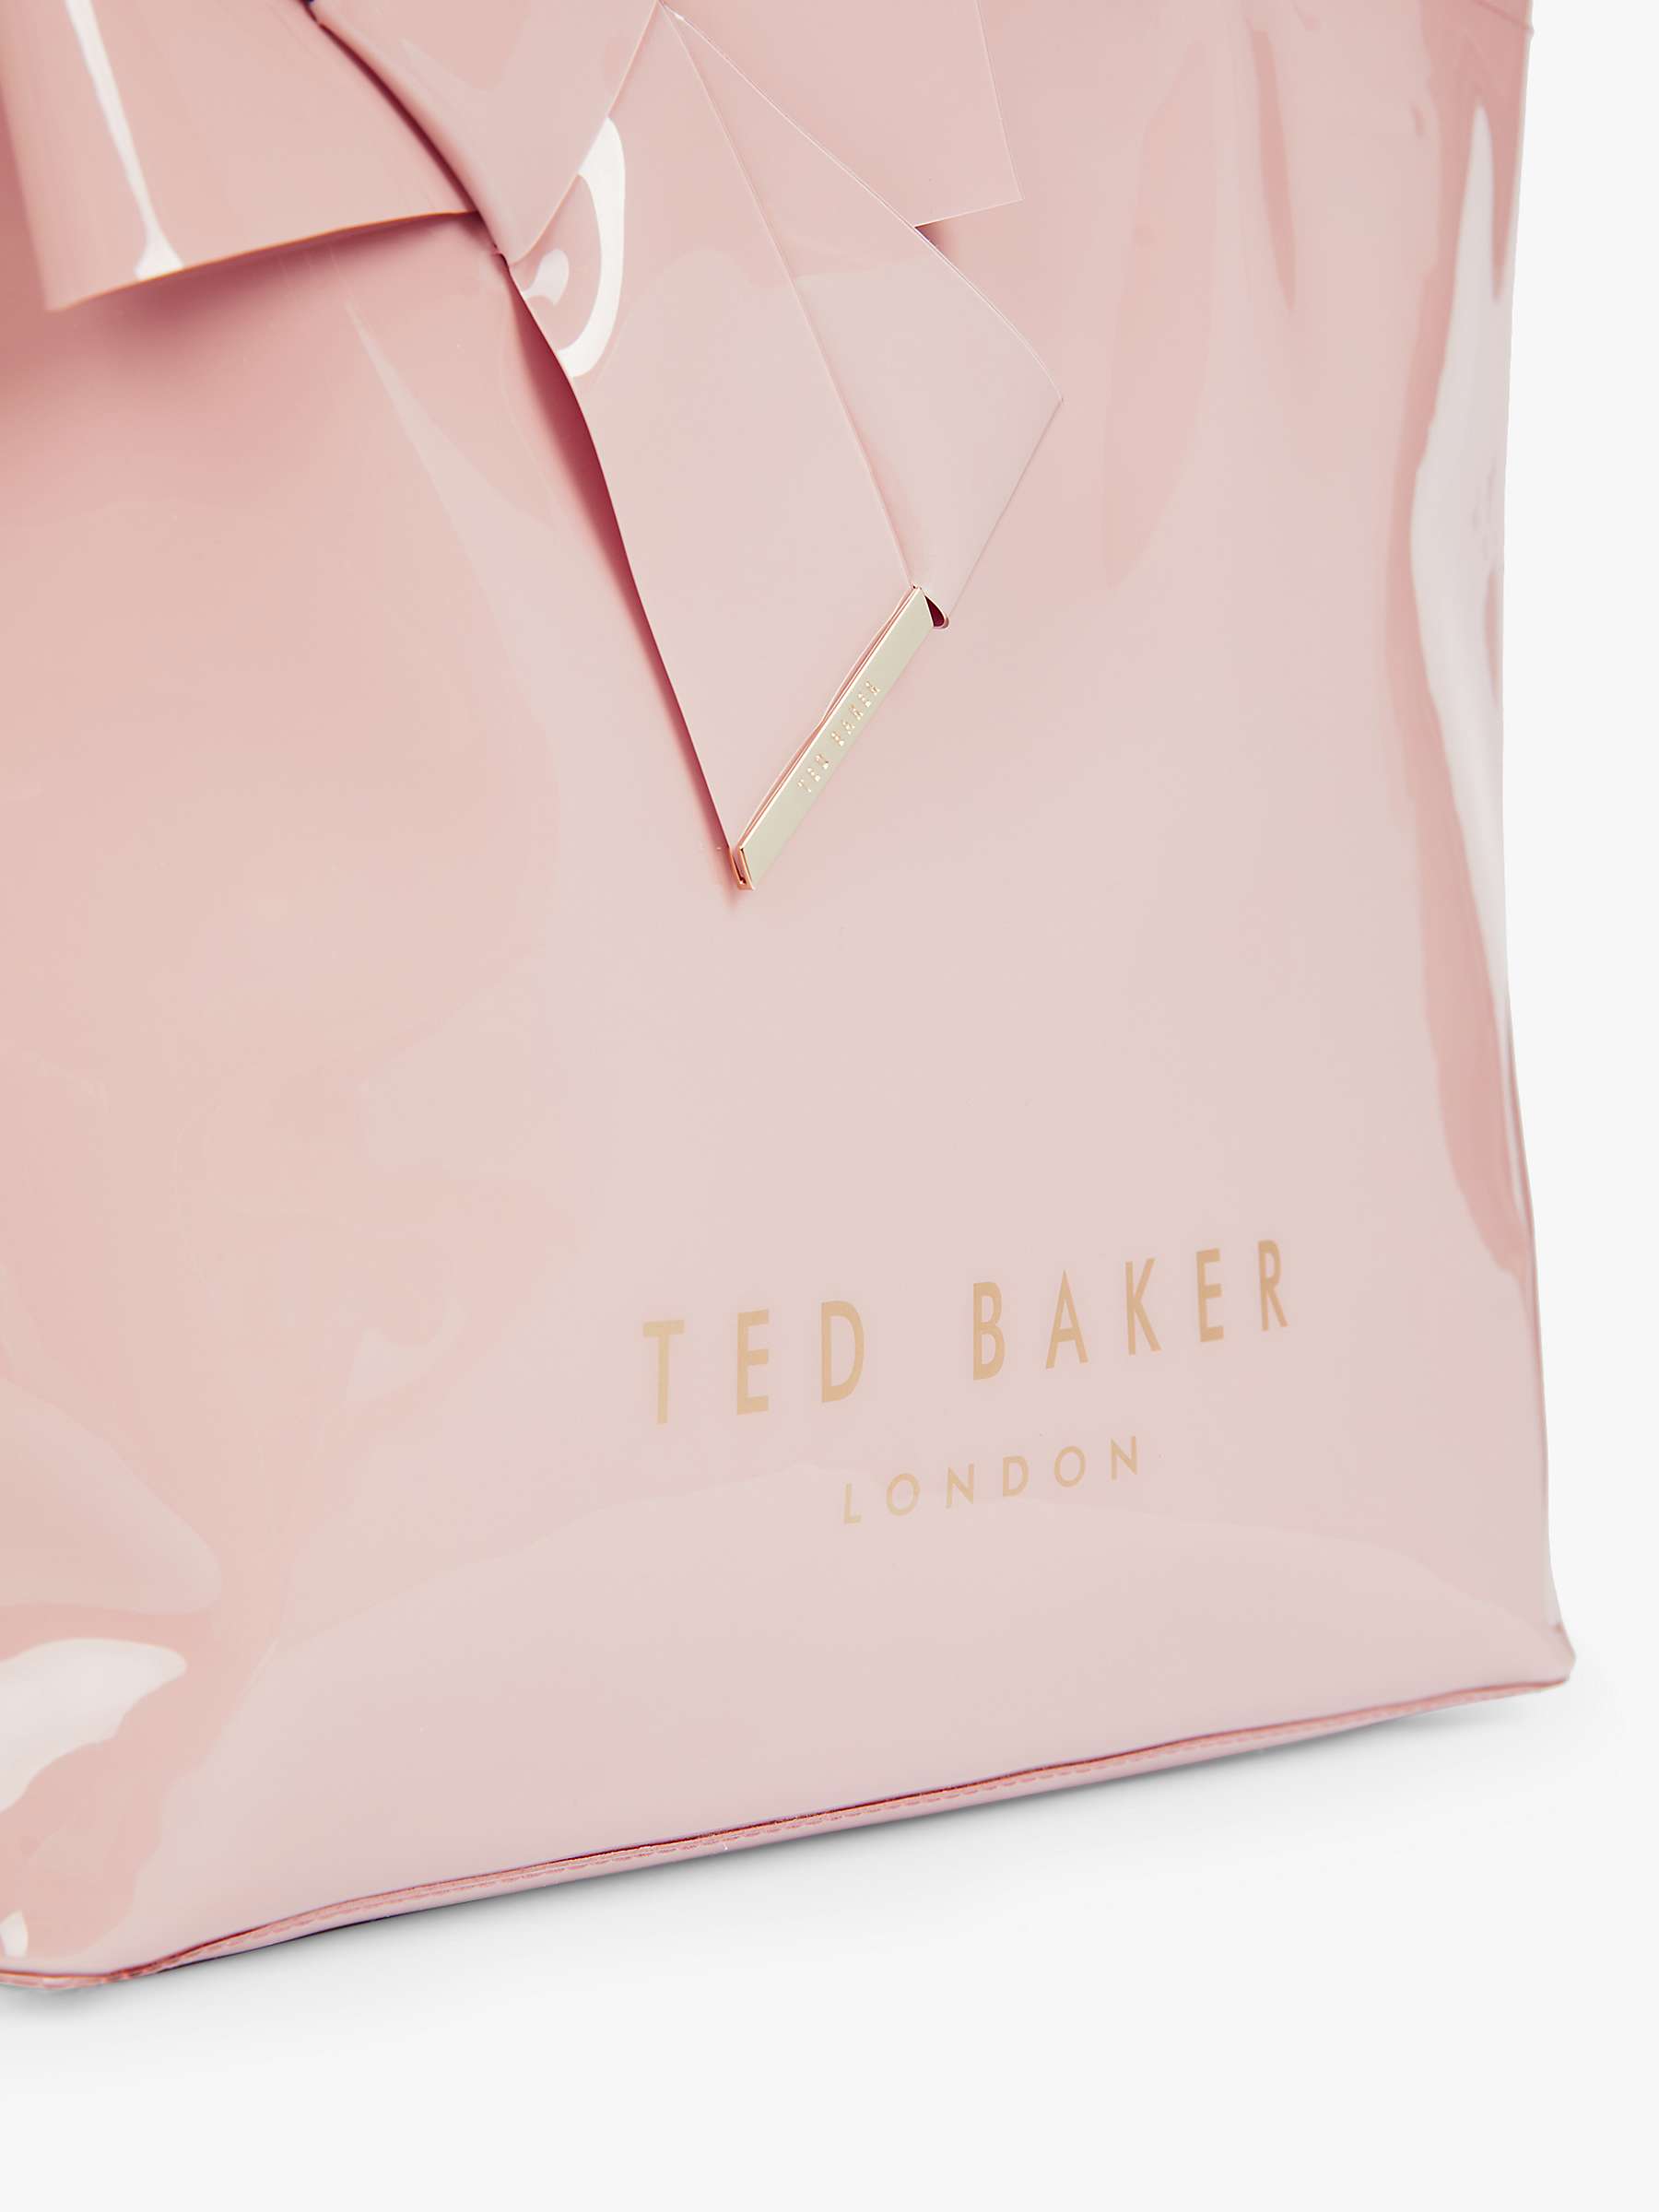 Ted baker Shopper \u201eNicon Knot Bow Large Icon\u201c pink Bags Shoppers 